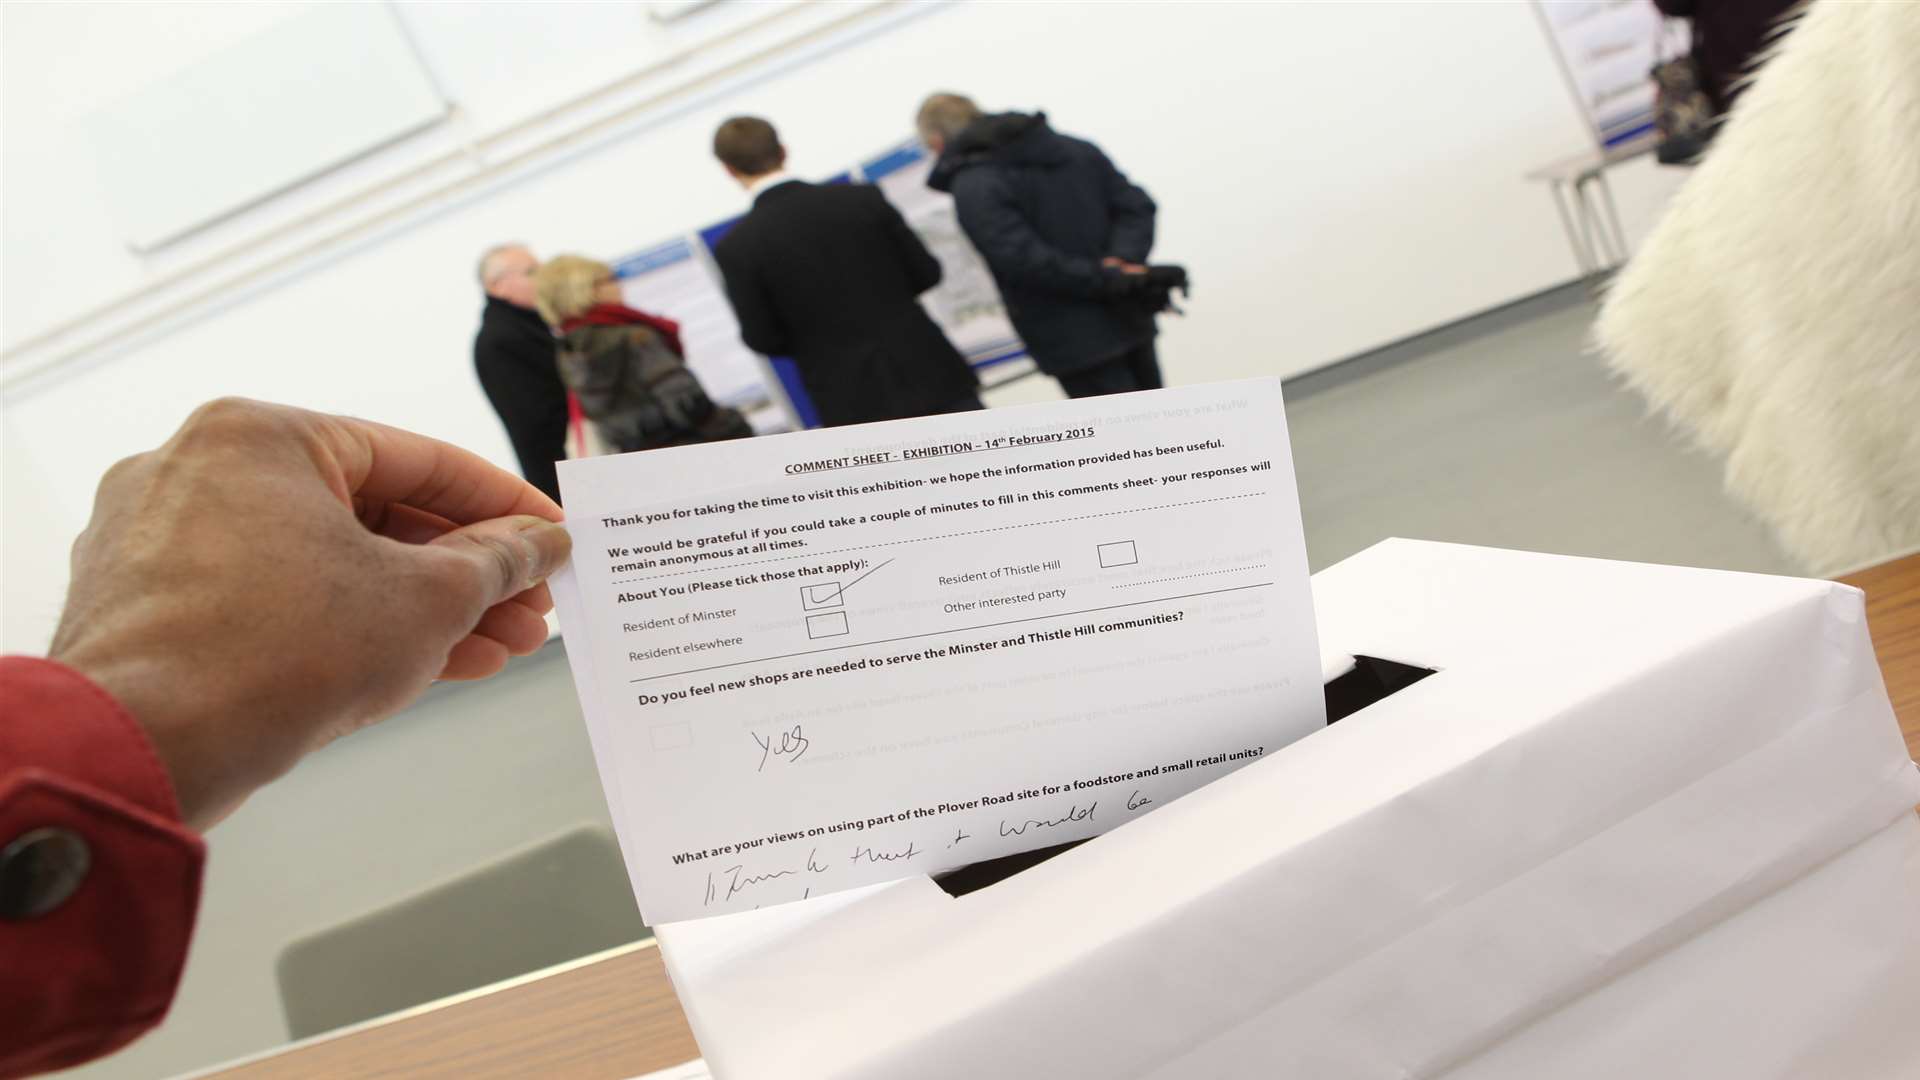 Members of the public were asked to fill out questionnaires